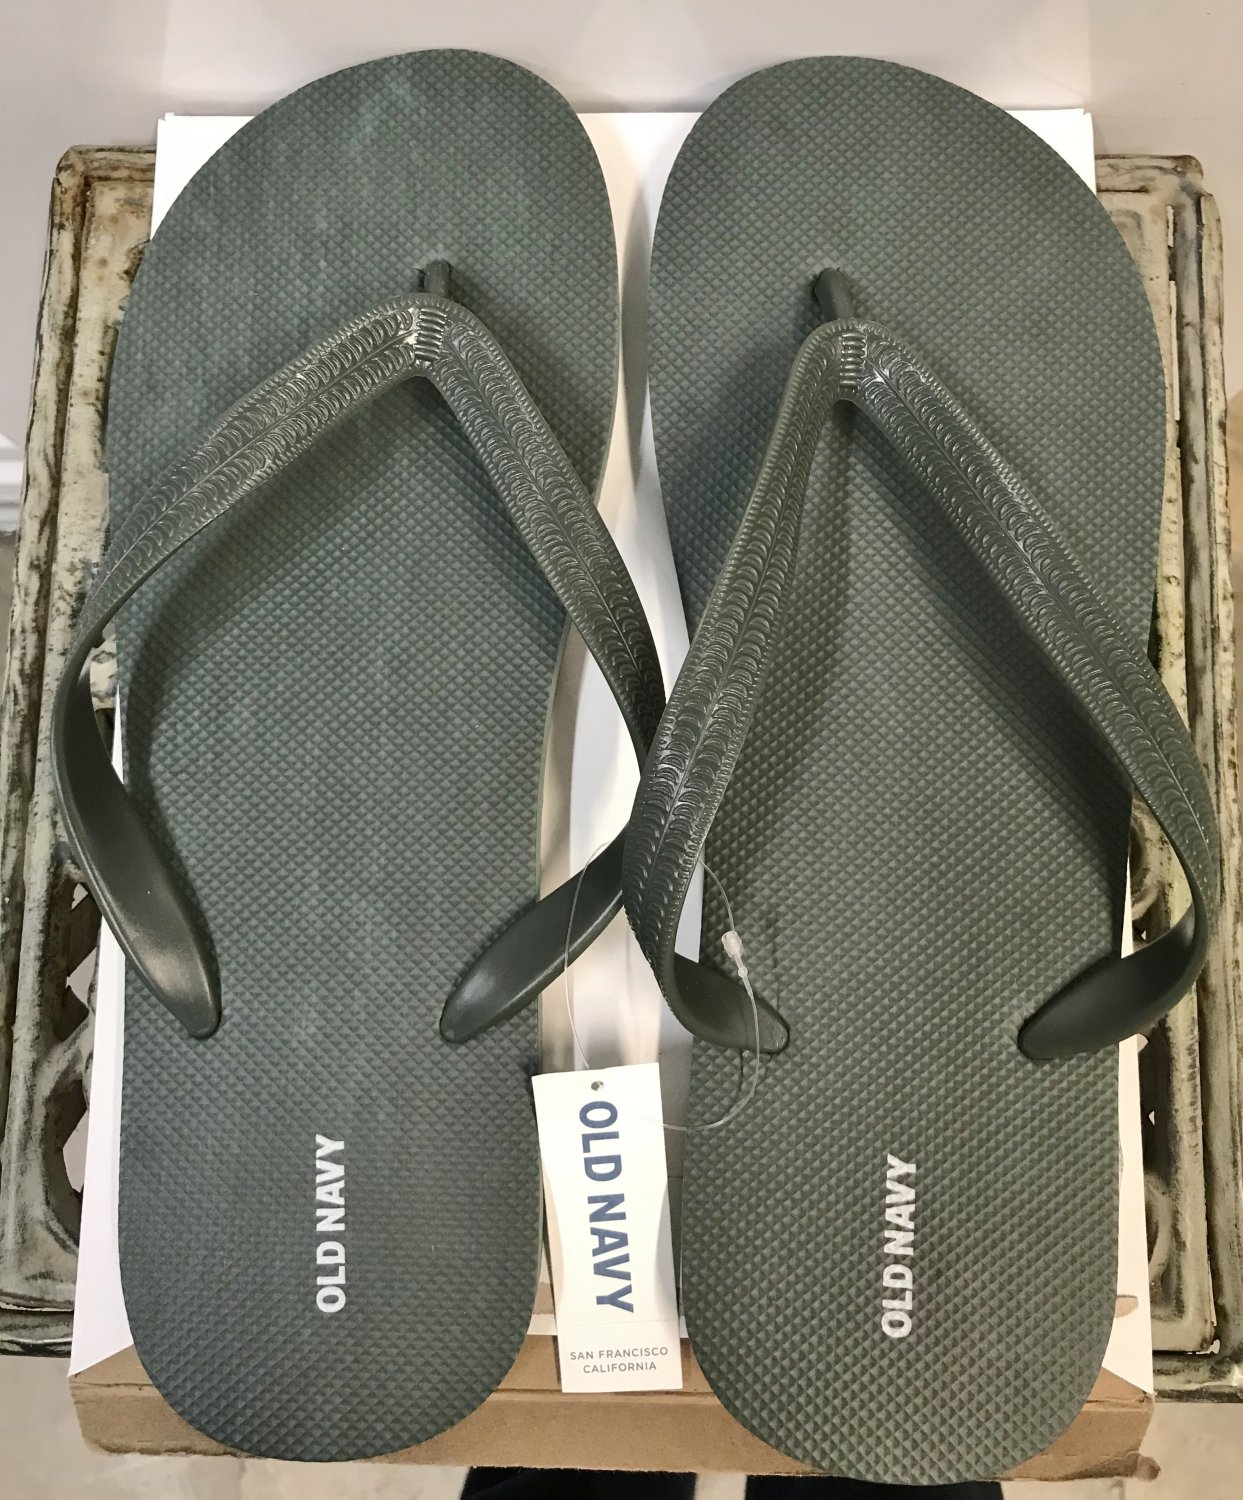 NEW Mens FLIP FLOPS Old Navy Sandals SIZE 12-13 HEATHERED GREEN Shoes ...